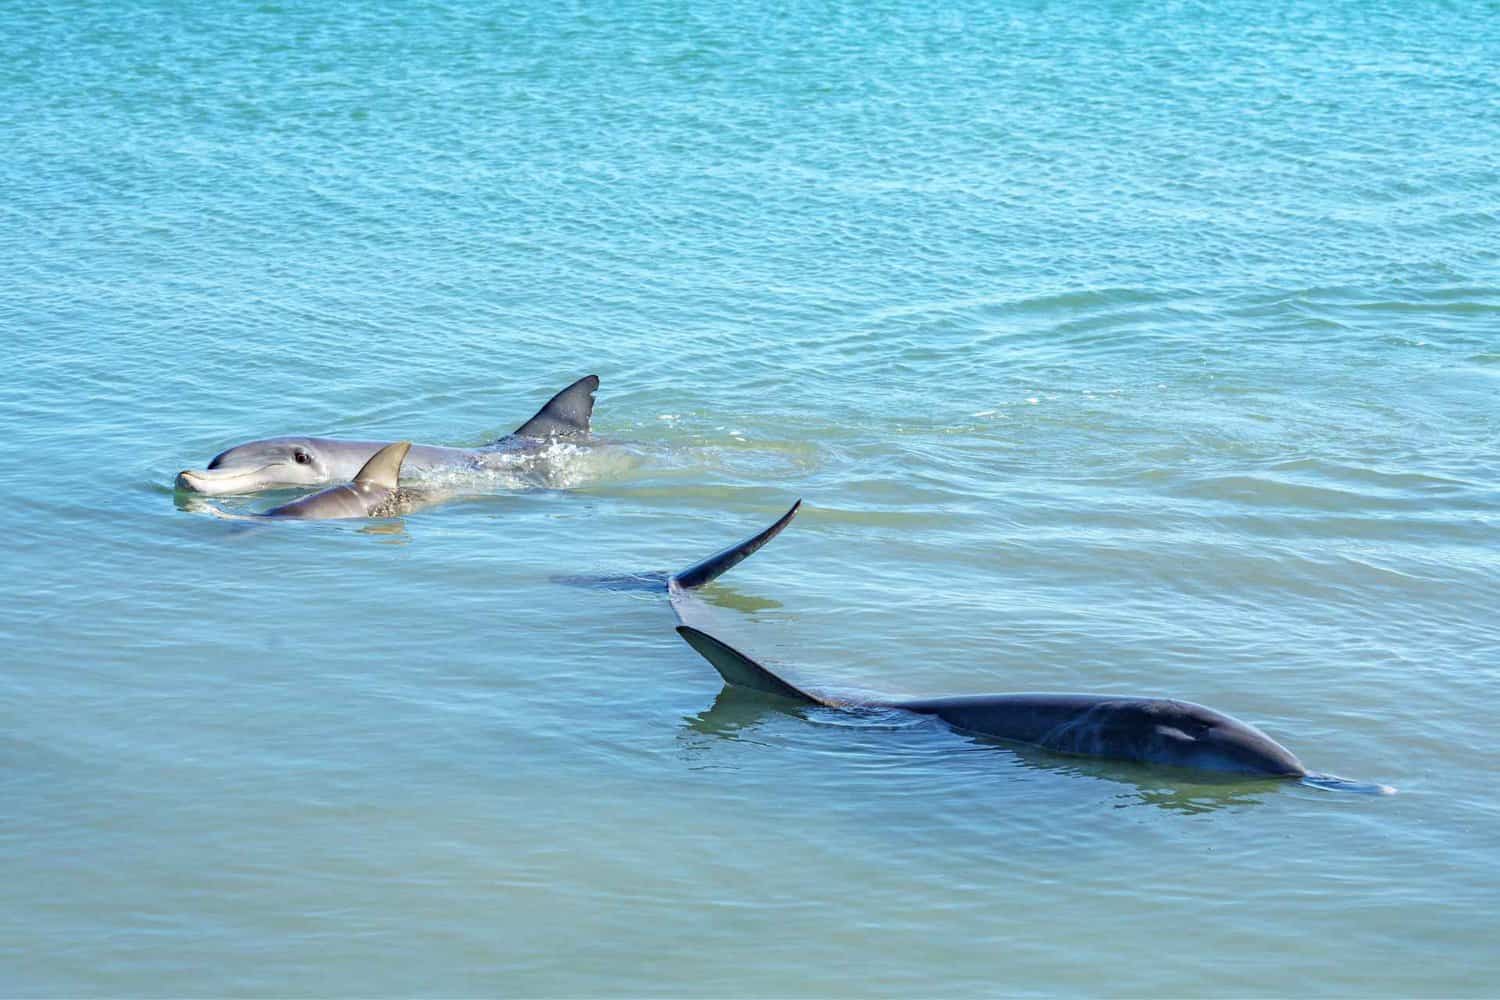 Captivating view of dolphins gracefully swimming in the waters of Monkey Mia, offering visitors an unforgettable encounter with marine life during their Perth to Exmouth journey